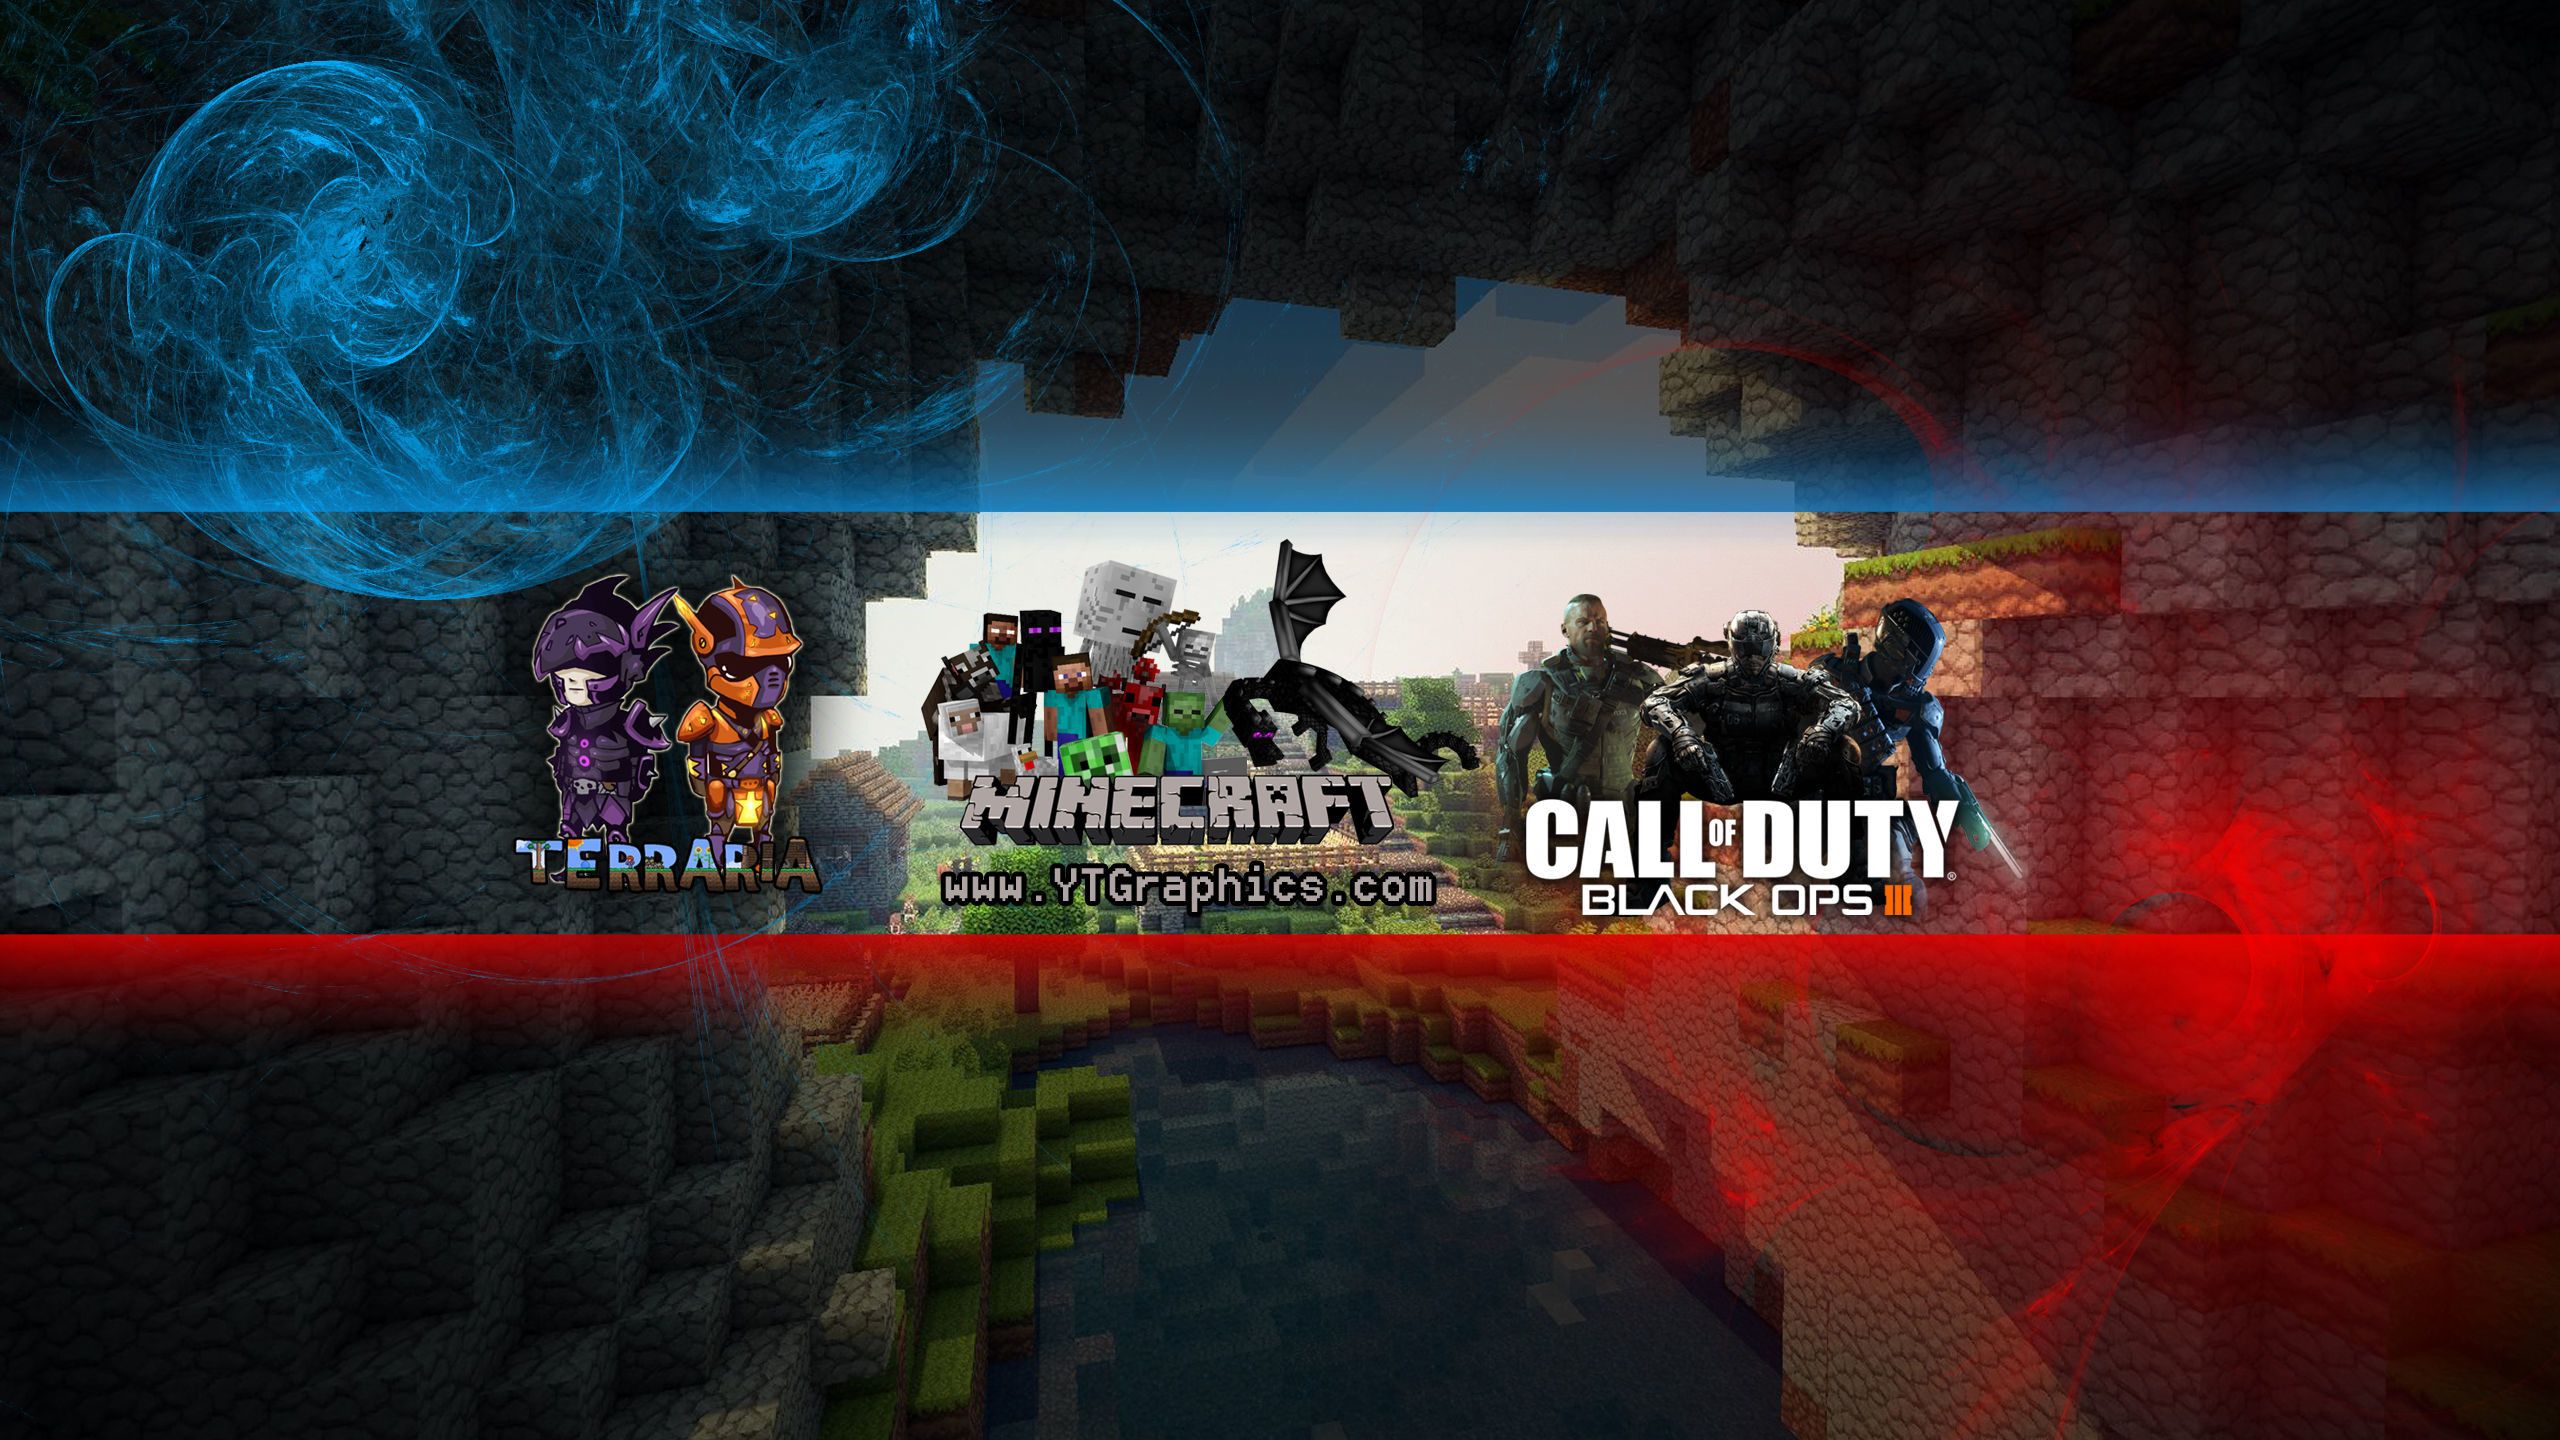 2560x Rot Red Banner No Text Download Banner Para Youtube HD Wallpaper